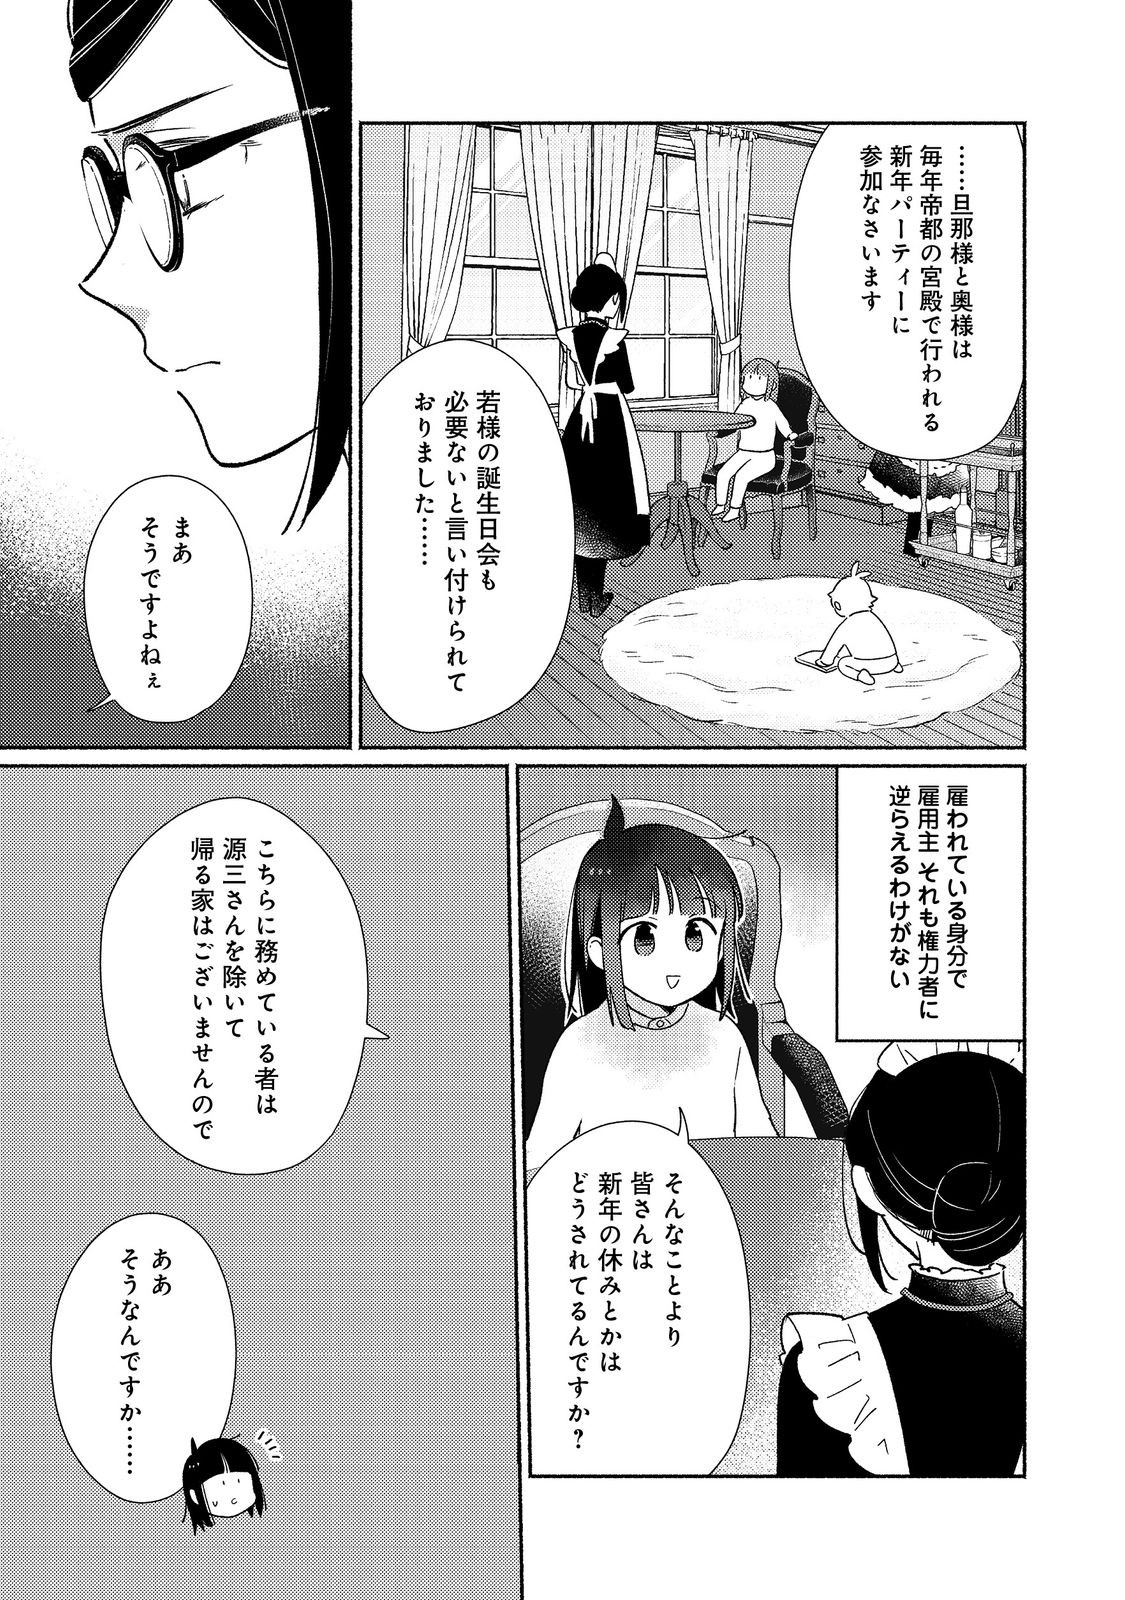 I’m the White Pig Nobleman 第24.1話 - Page 3